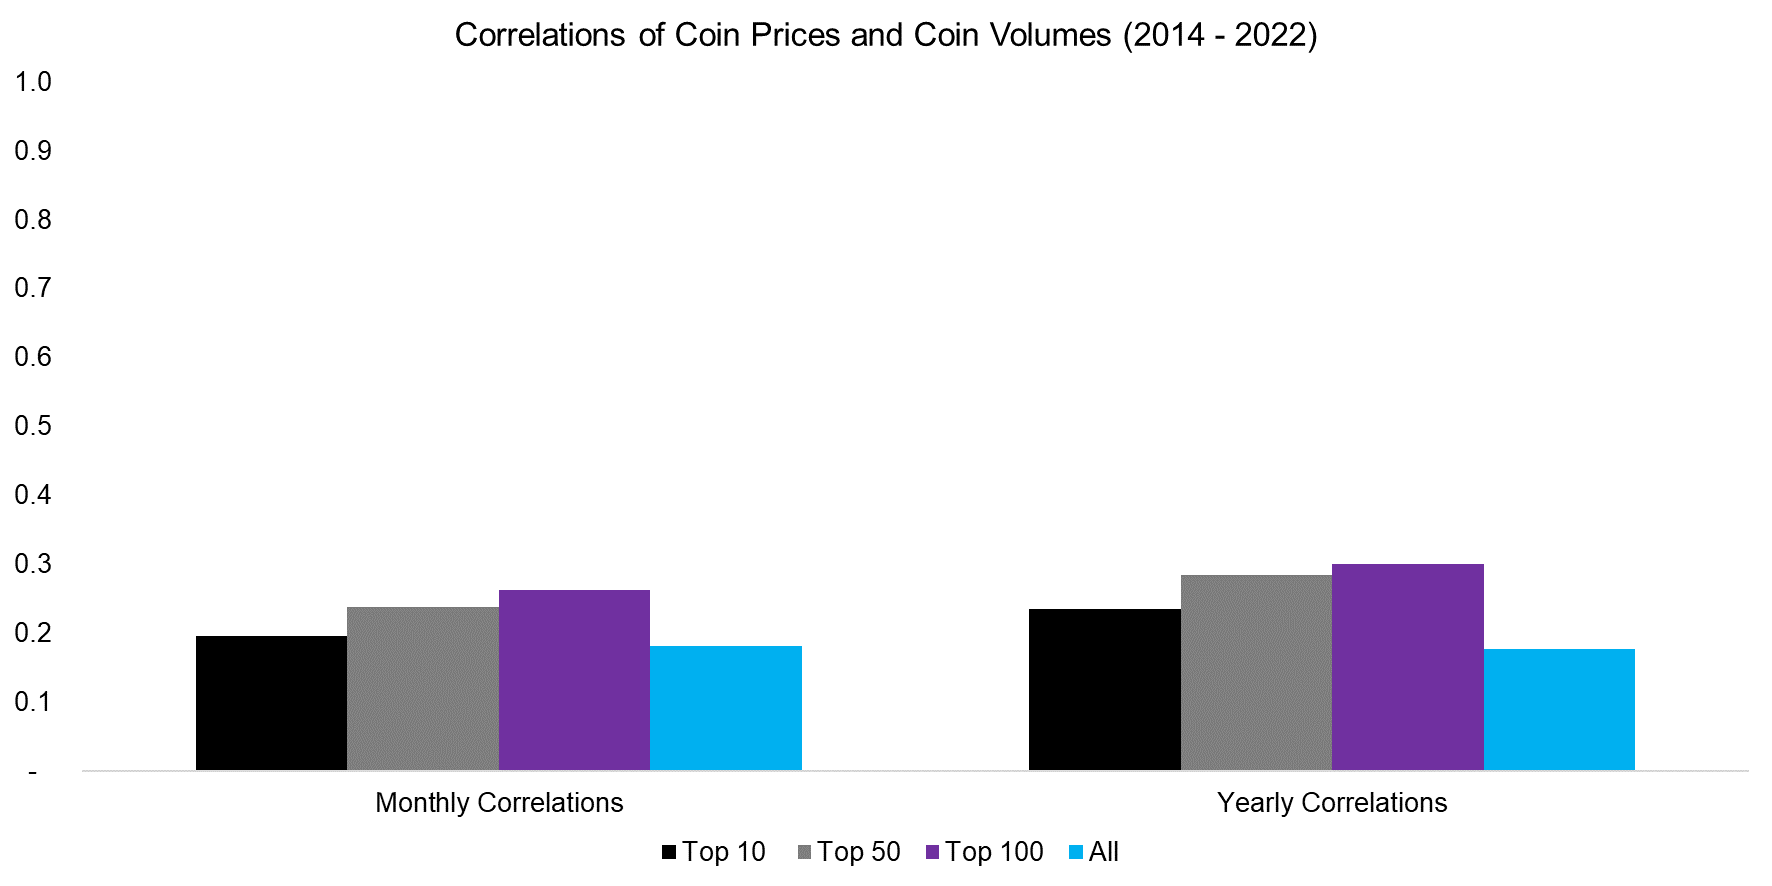 Correlations of Coin Prices and Coin Volumes (2014 - 2022)